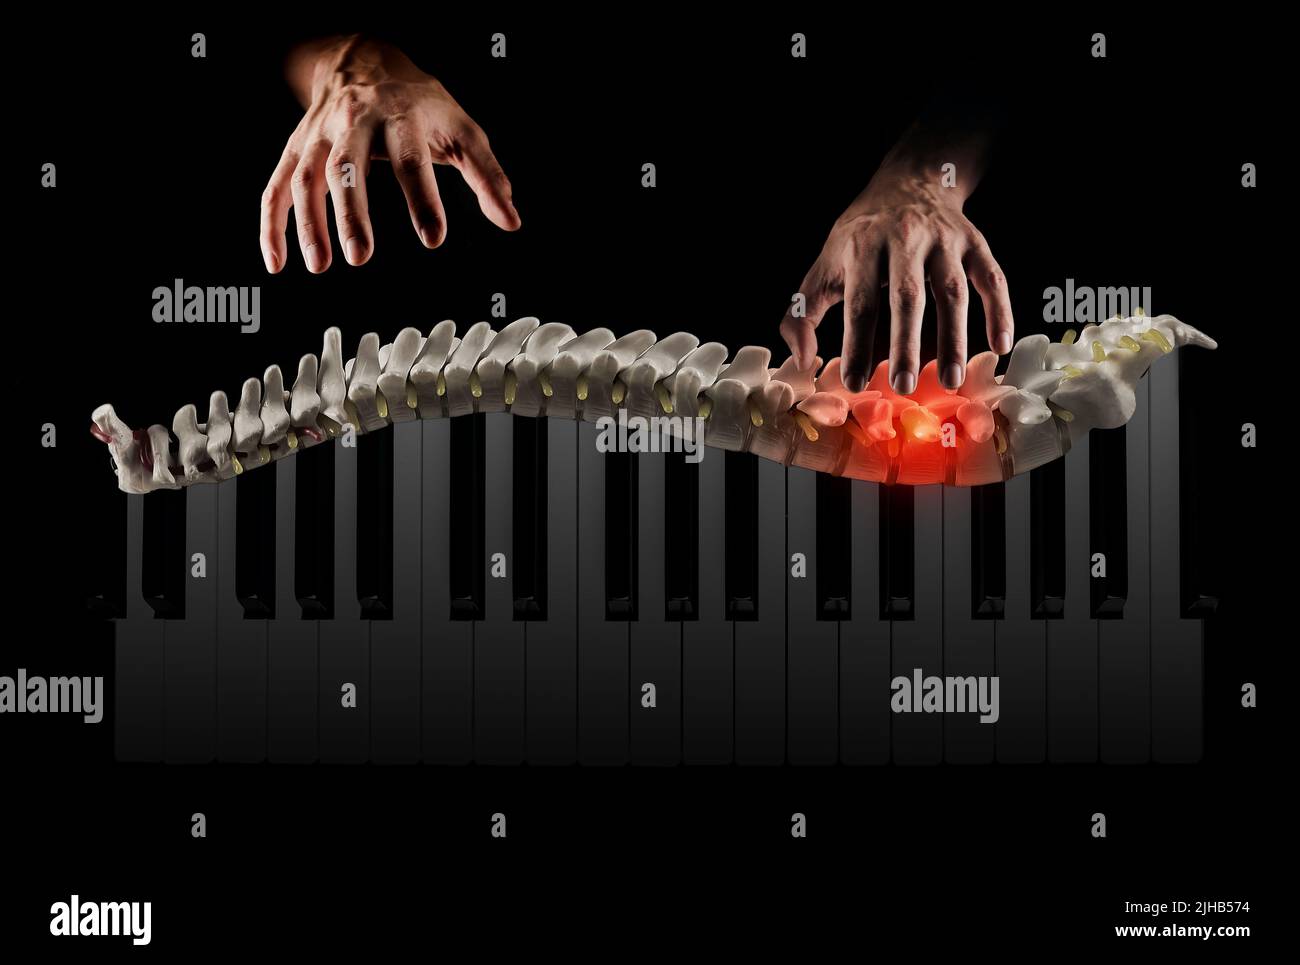 Chiropractic massage from back pain, manual therapy concept. Manual therapist professionally treats human spine as if playing piano Stock Photo